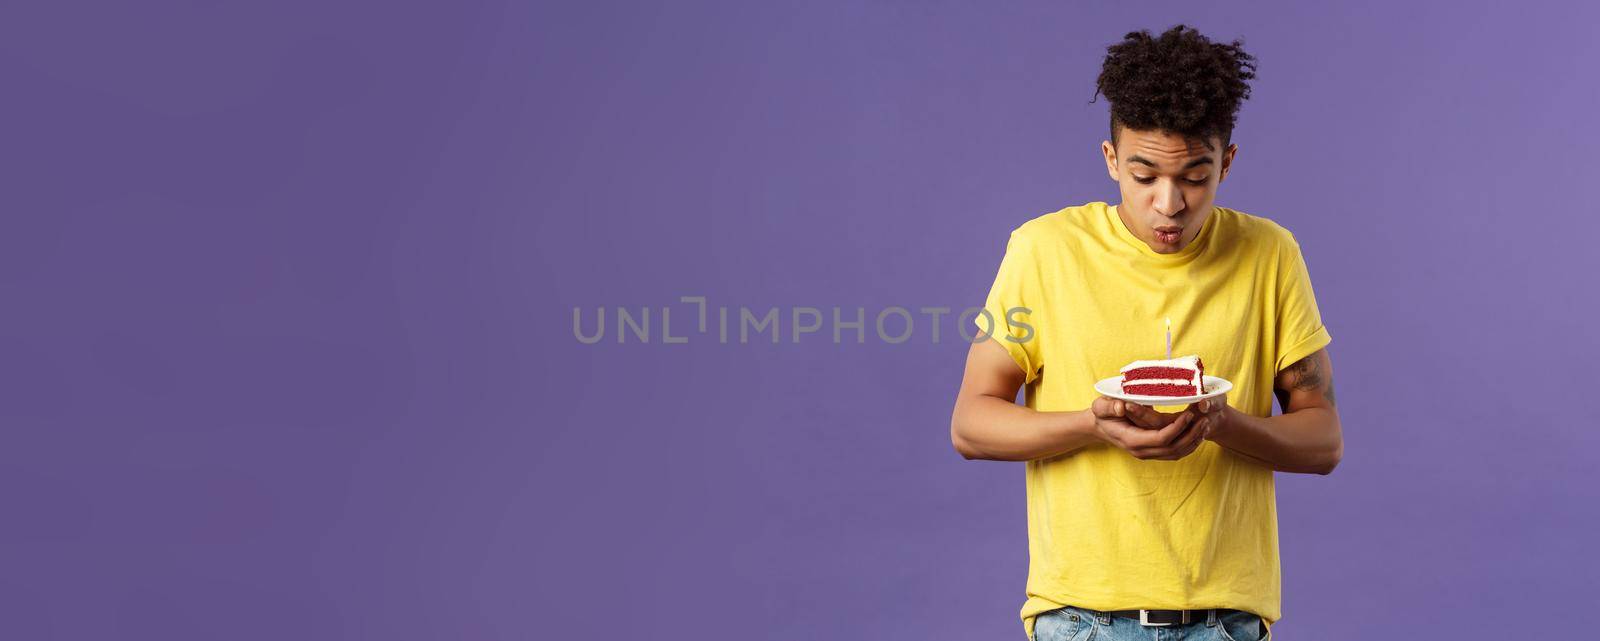 Portrait of cute excited young guy with dreads and tattoos, making wish on birthday, celebrating party, blowing candle on b-day cake, standing purple background dreaming by Benzoix